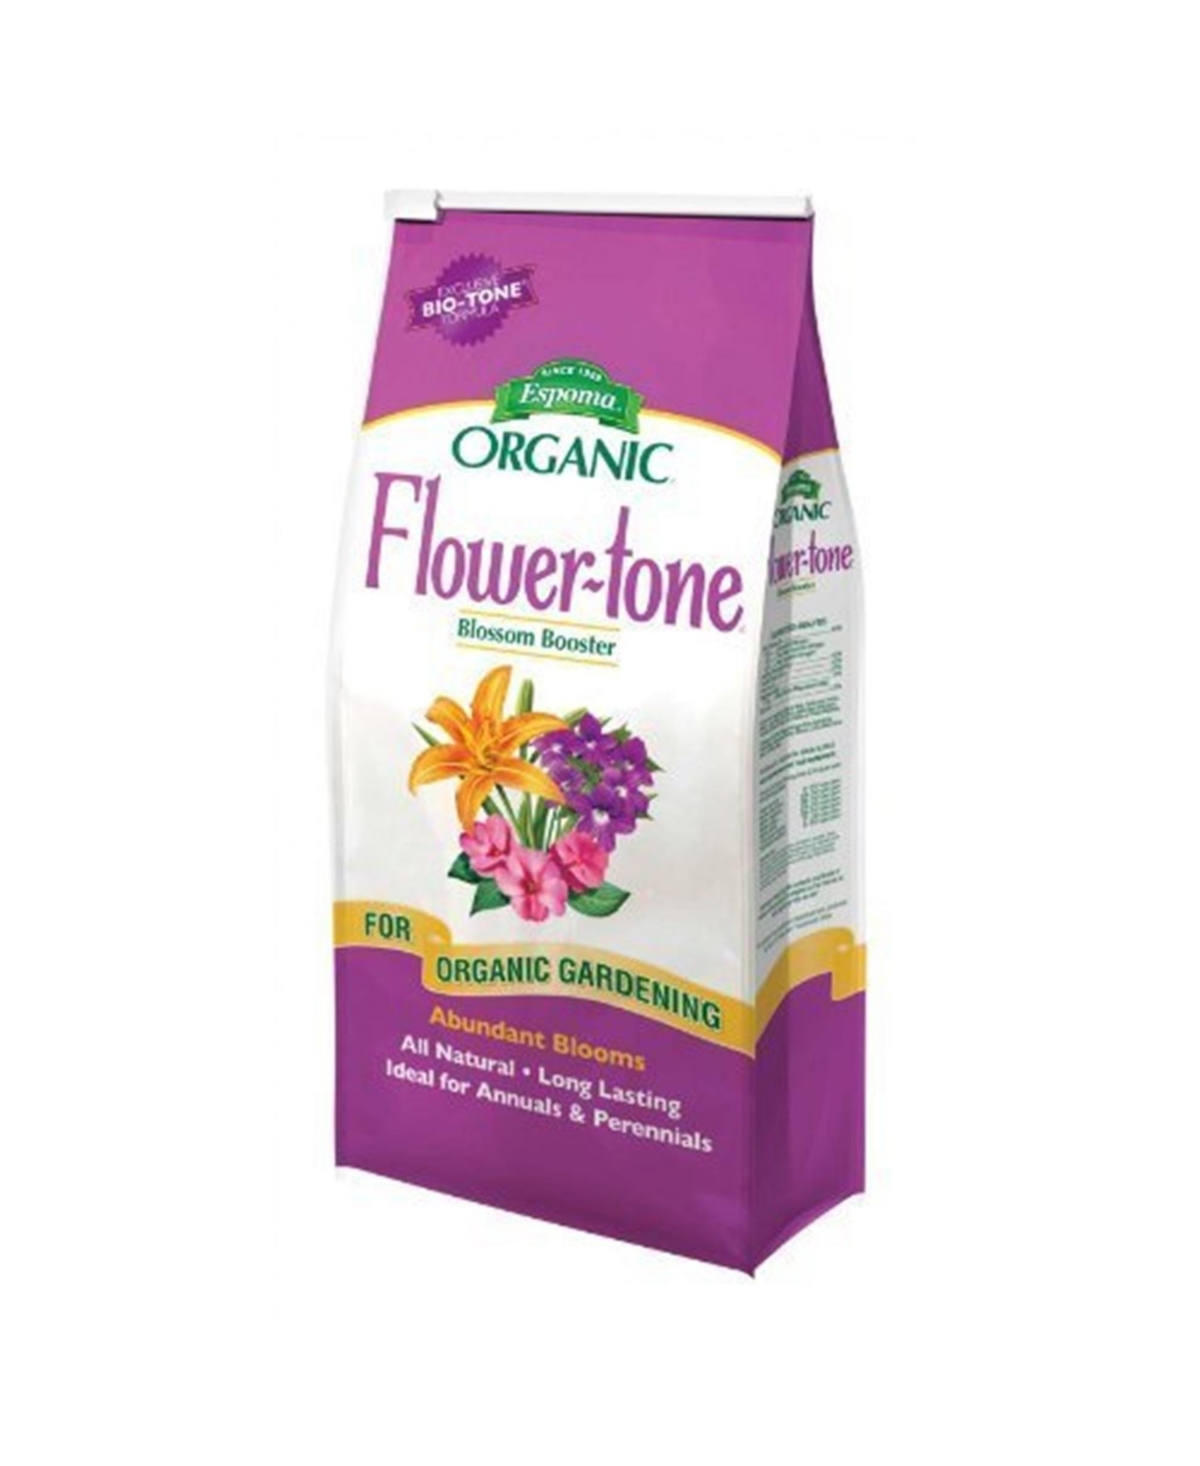 Organic Flower-Tone Bloom Booster - 4 Pounds - Pink